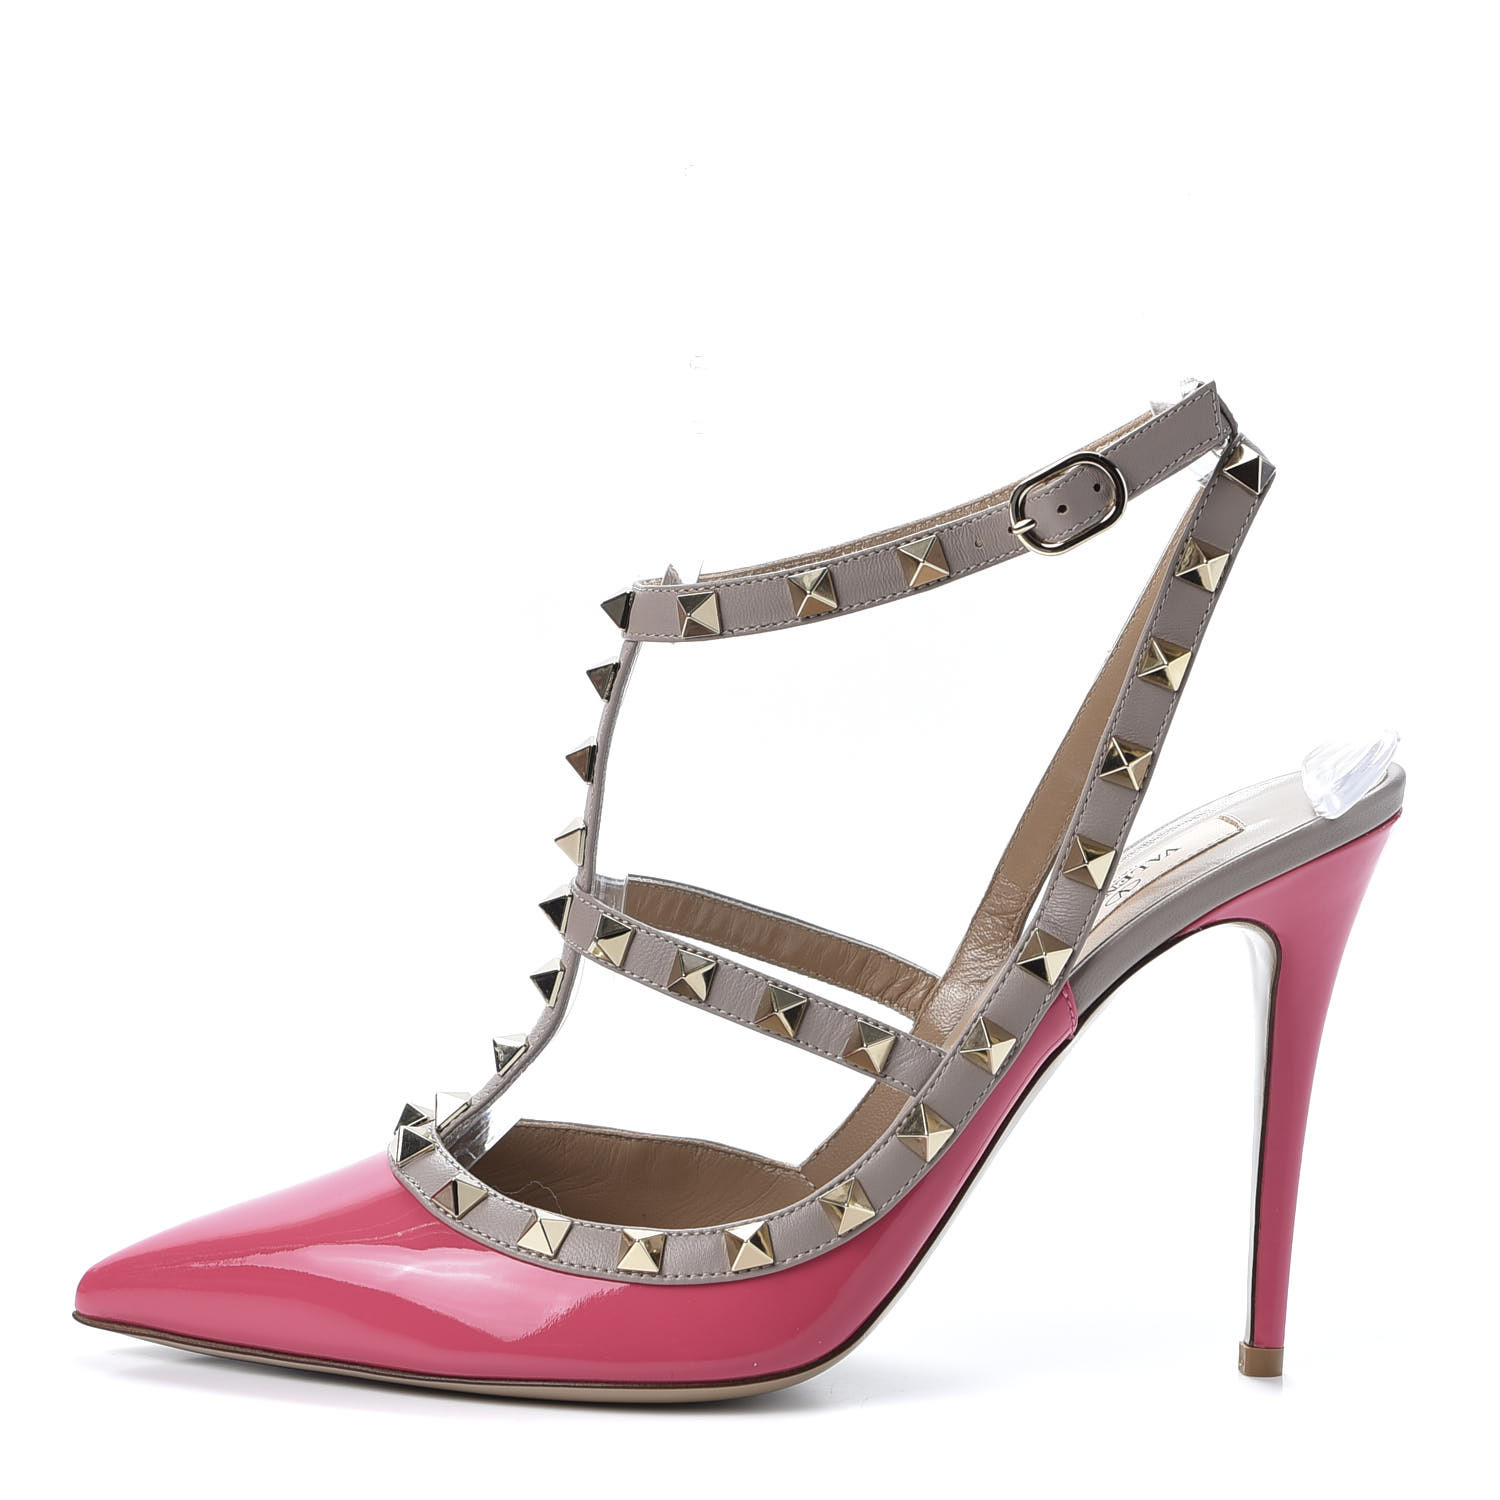 VALENTINO Patent Rockstud Ankle Strap Pumps 40 Shadow Pink 583560